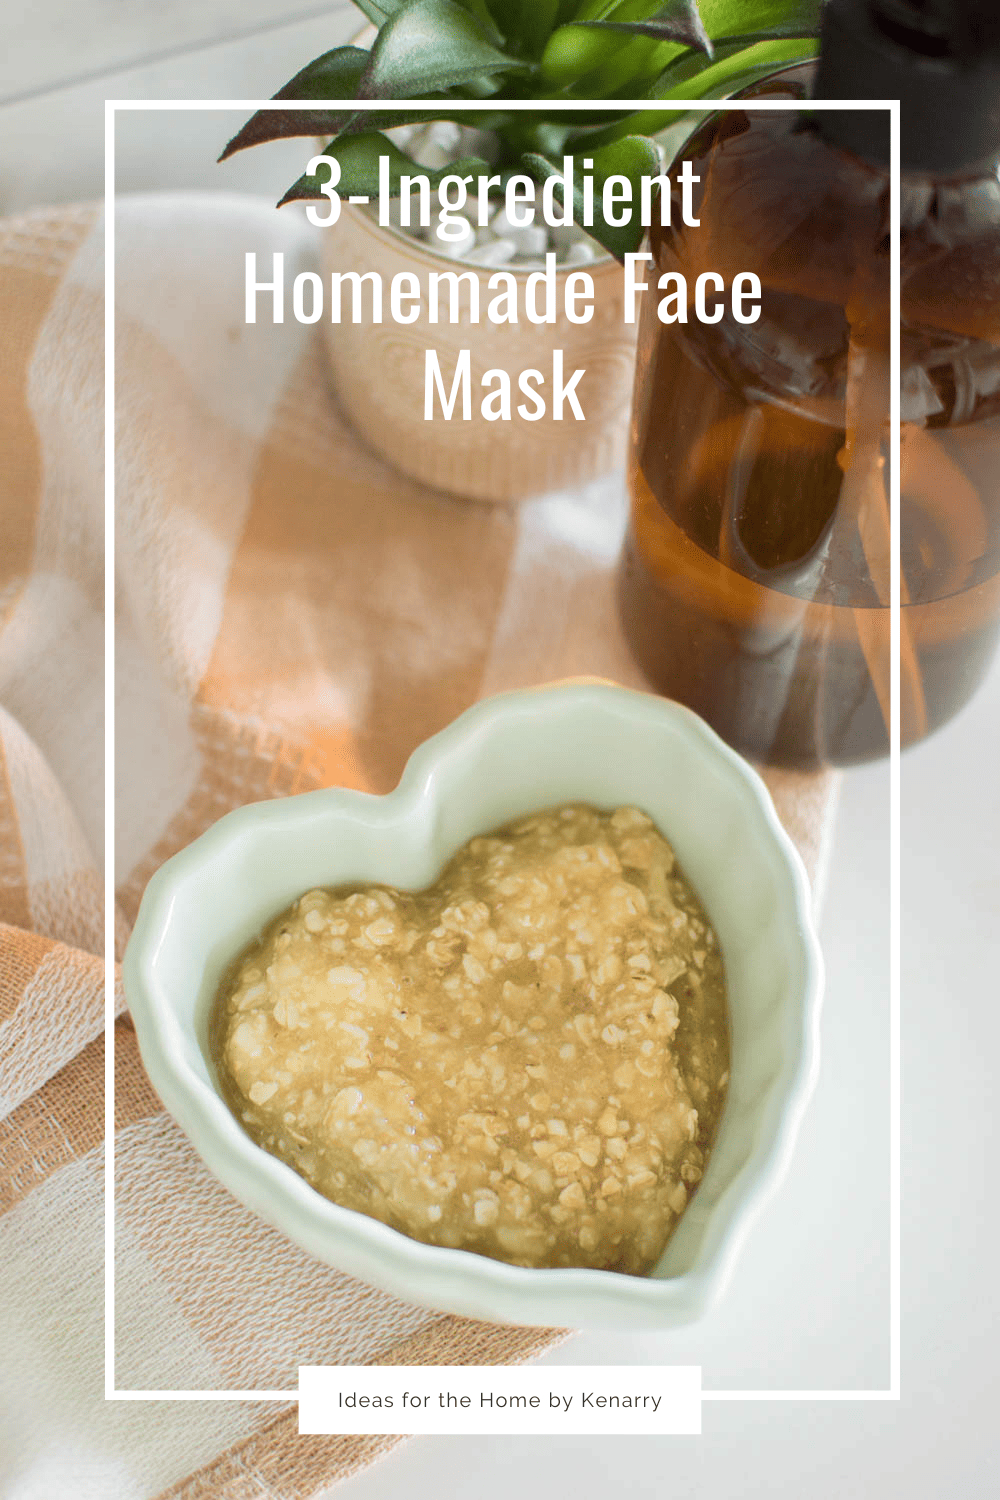 Bananas, oats, and honey mashed and mixed together to create a homemade face mask, in a heart-shaped bowl, sitting on a plaid tea towel